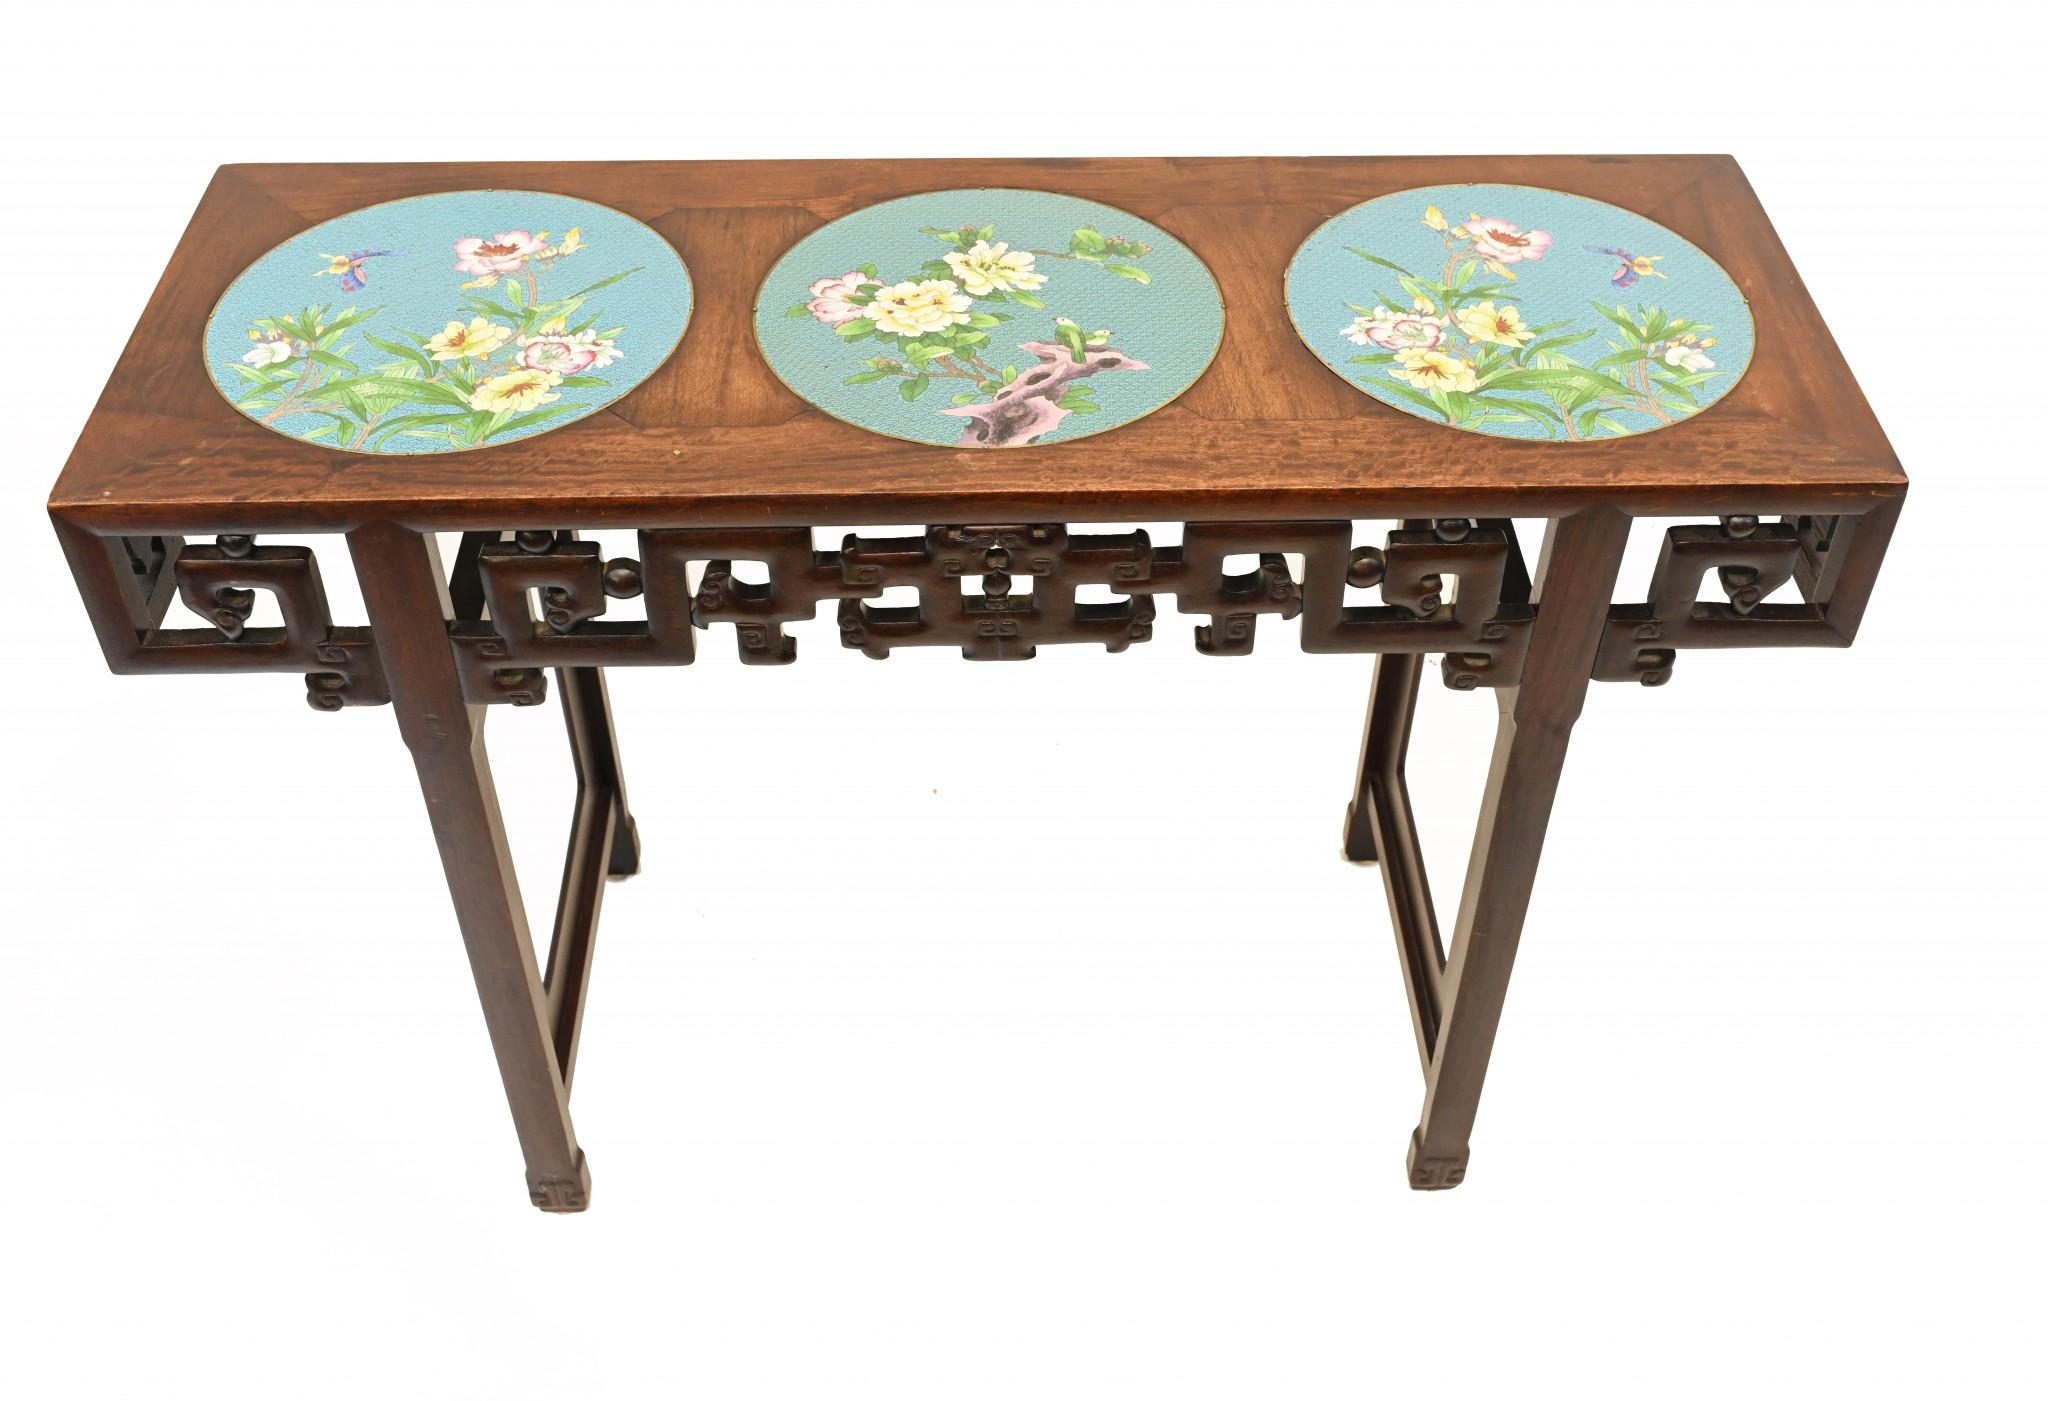 Early 20th Century Chinese Console Table Hardwood Cloisonne Porcelain Plates For Sale